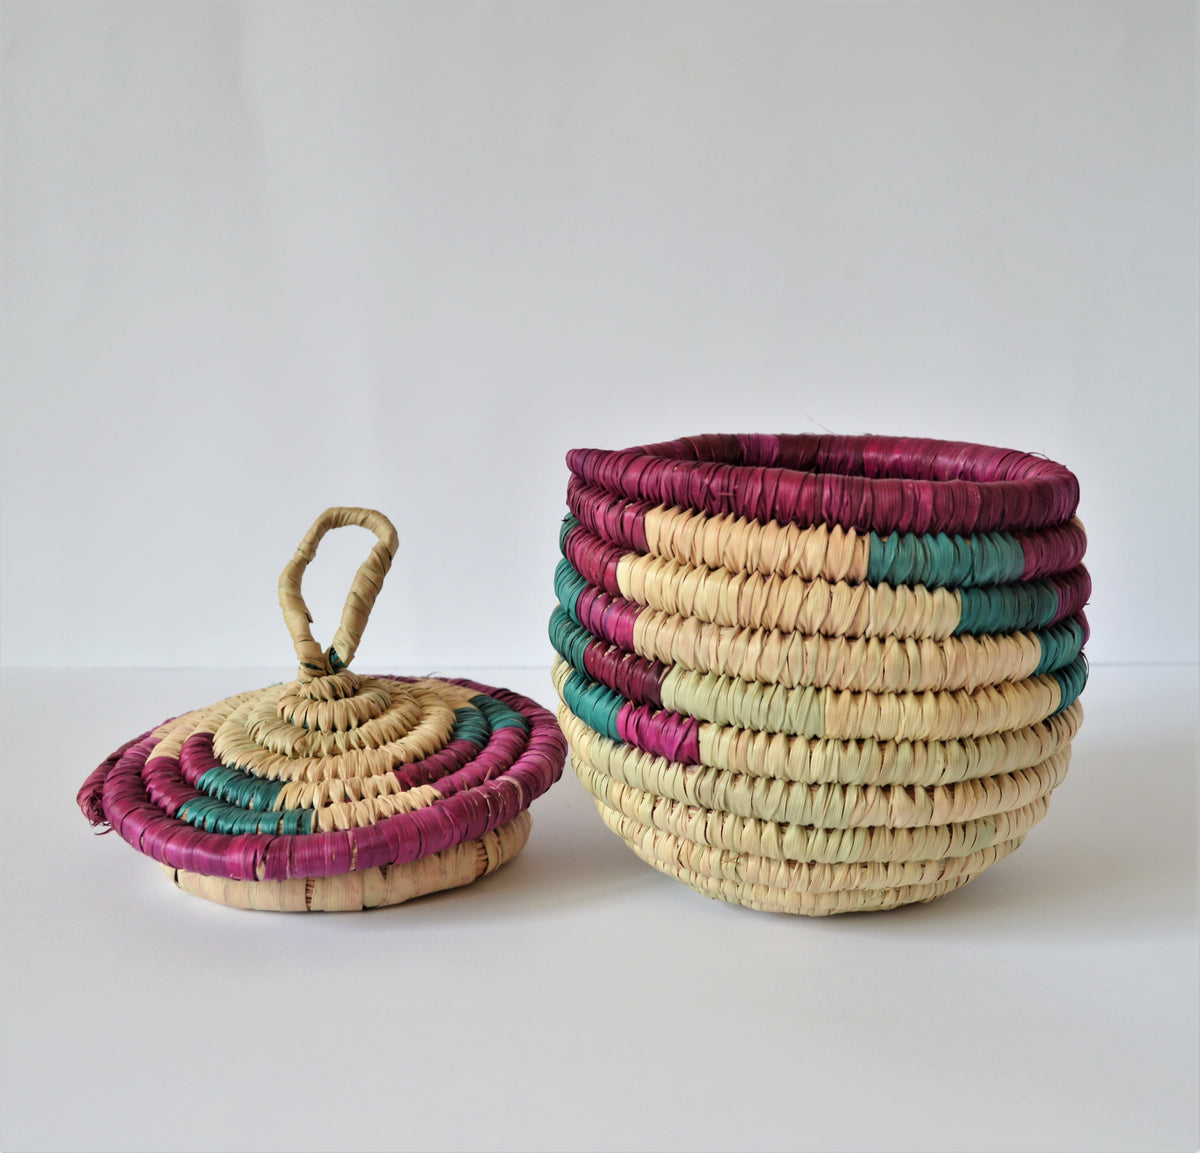 1970s Vintage Handcrafted Coiled Yarn Basket